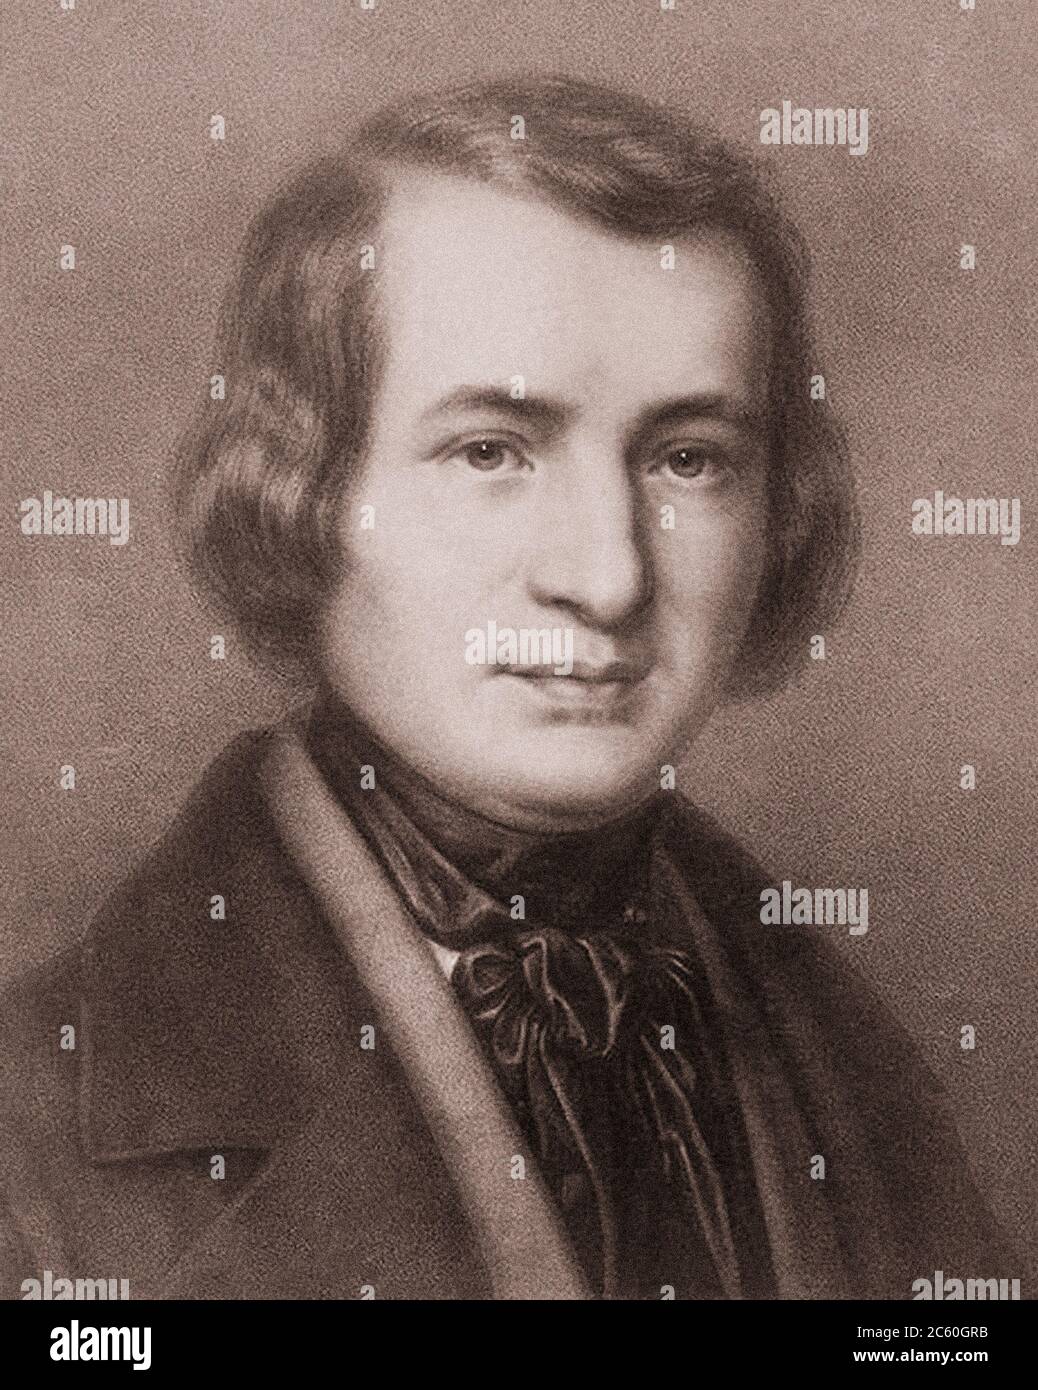 Christian Johann Heinrich Heine (1797 – 1856) was a German poet, writer and literary critic. He is best known outside Germany for his early lyric poet Stock Photo